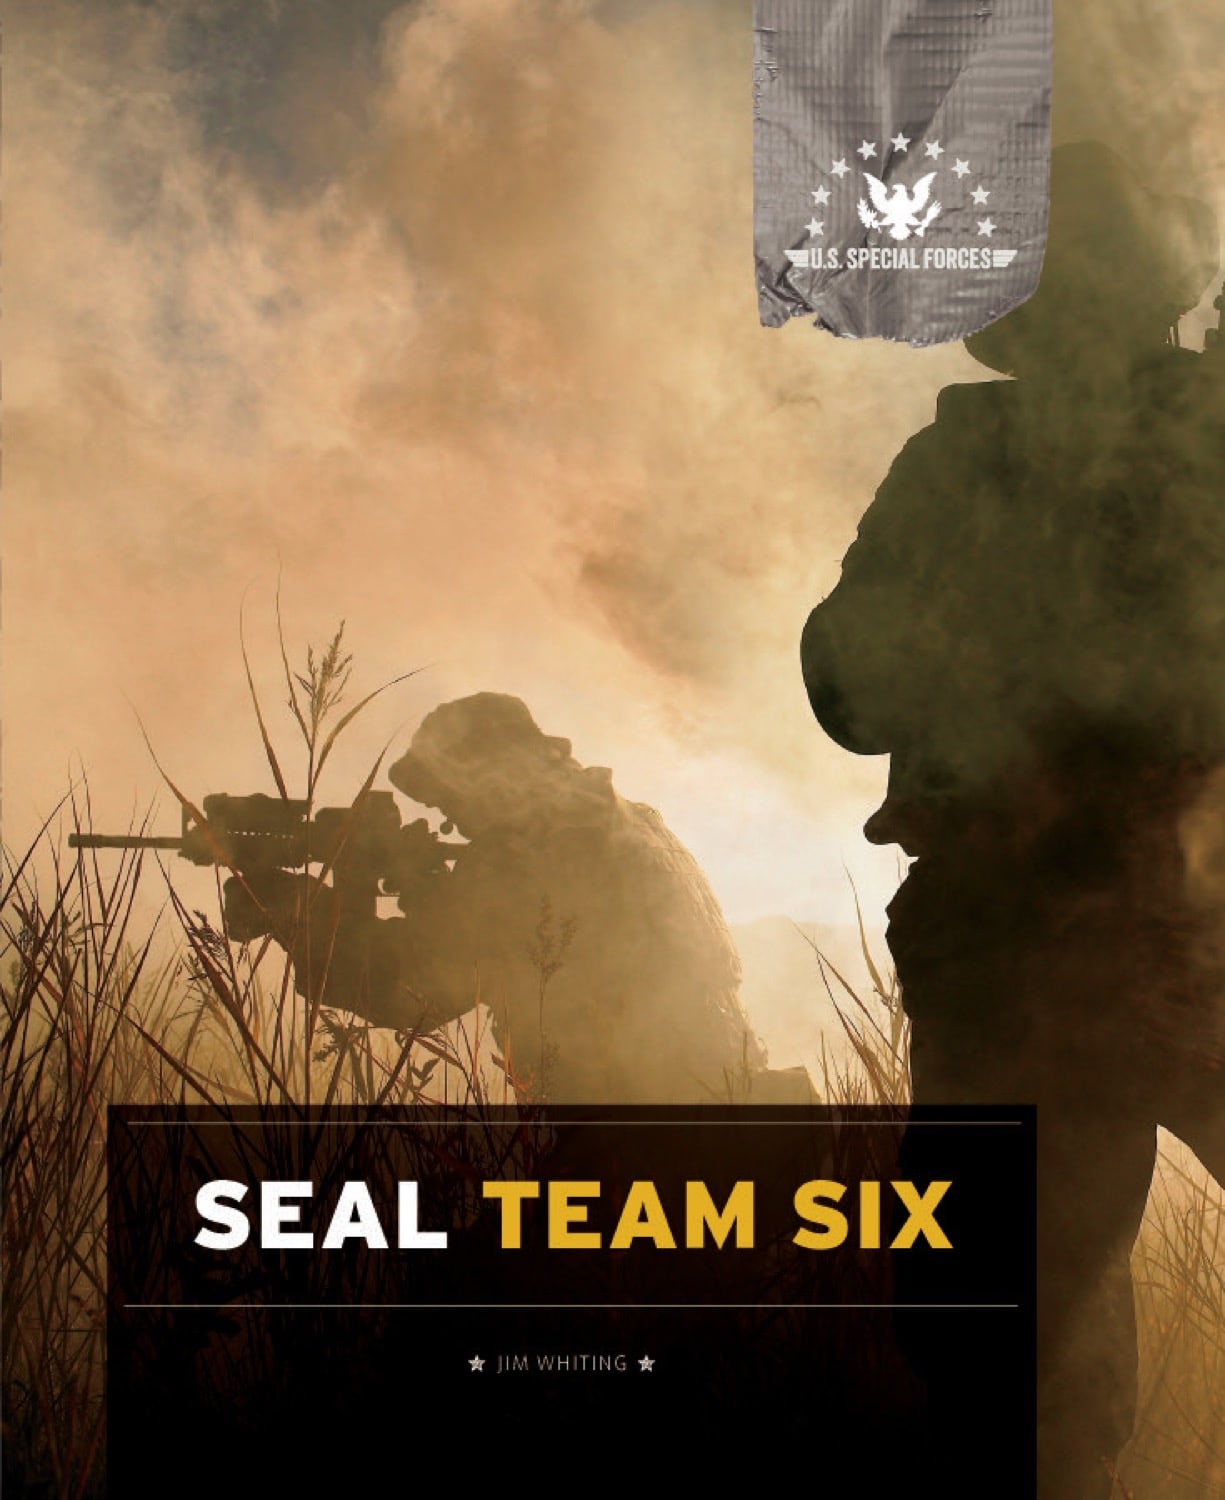 U.S. Special Forces: SEAL Team Six